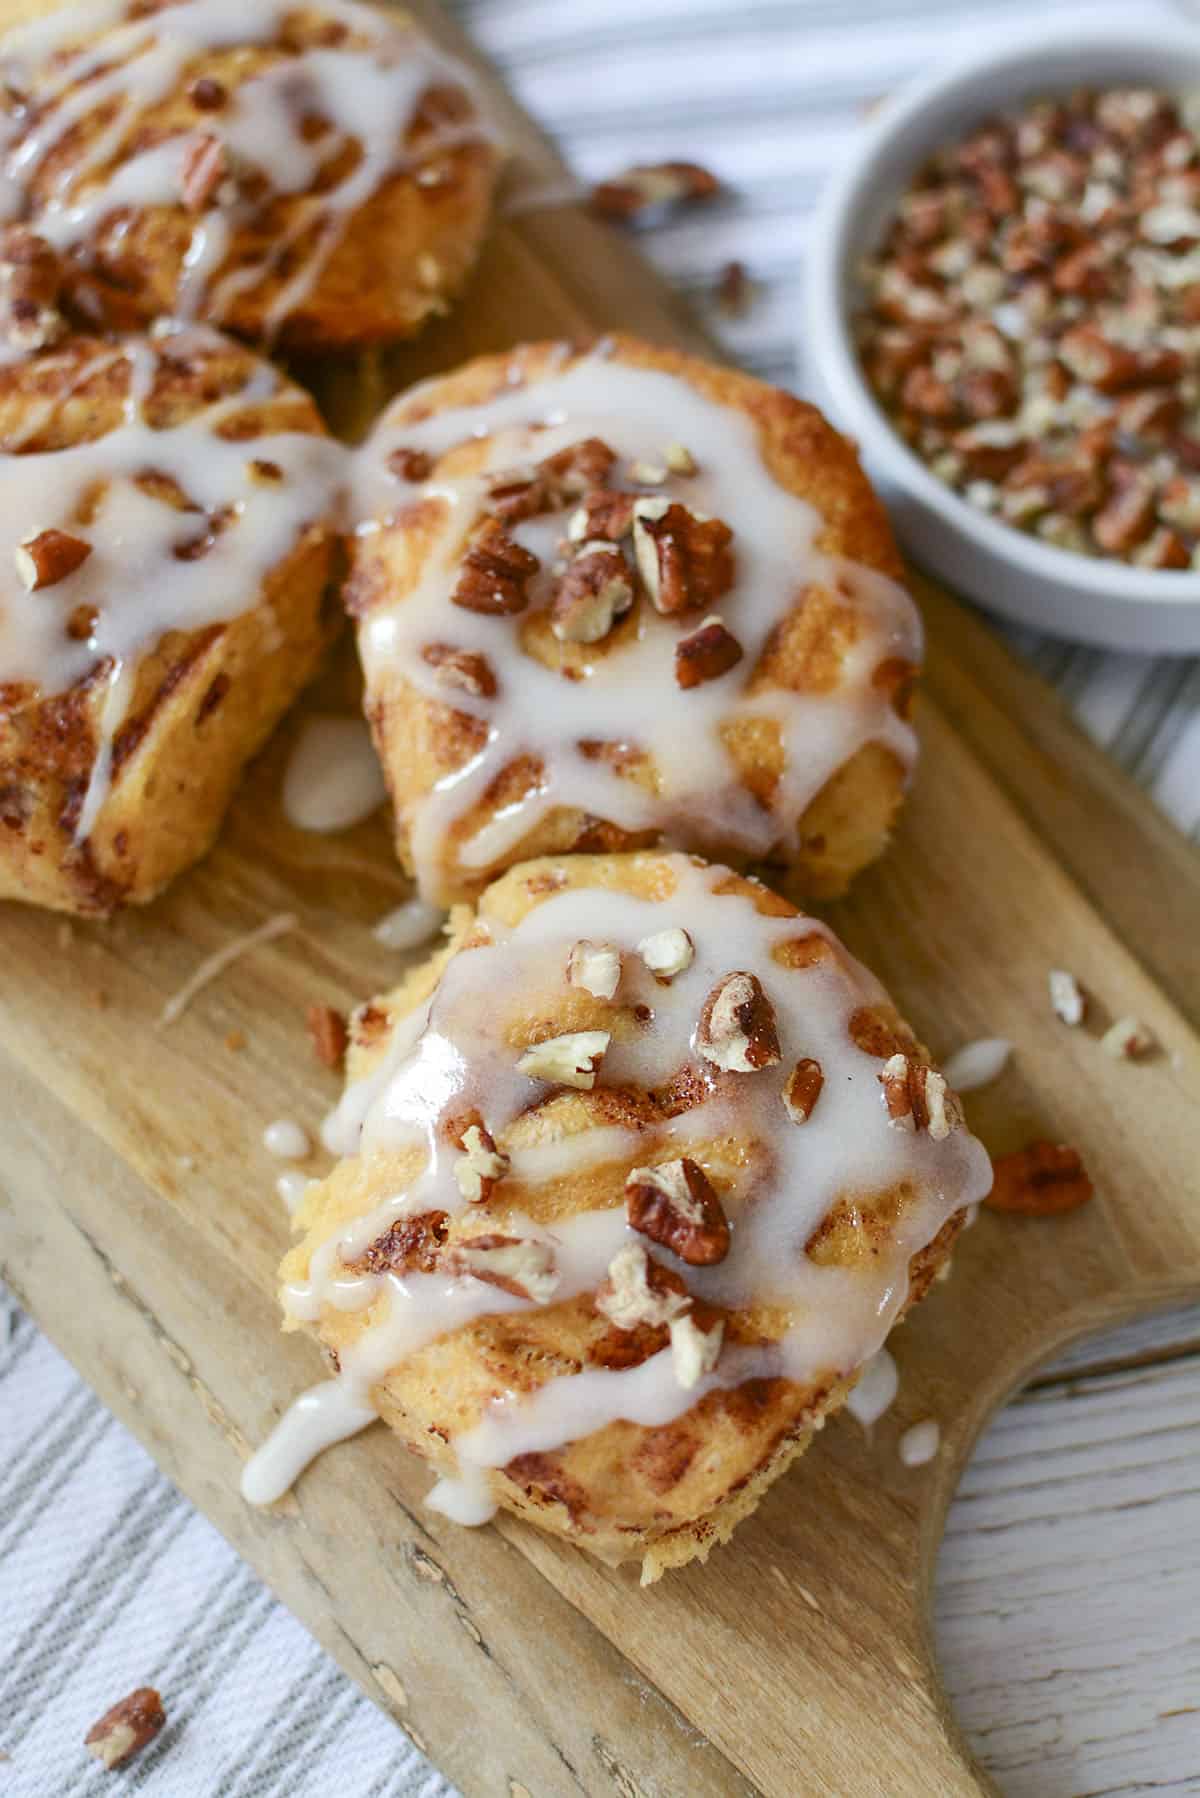 A top down view of the cinnamon buns on a wooden cutting board.